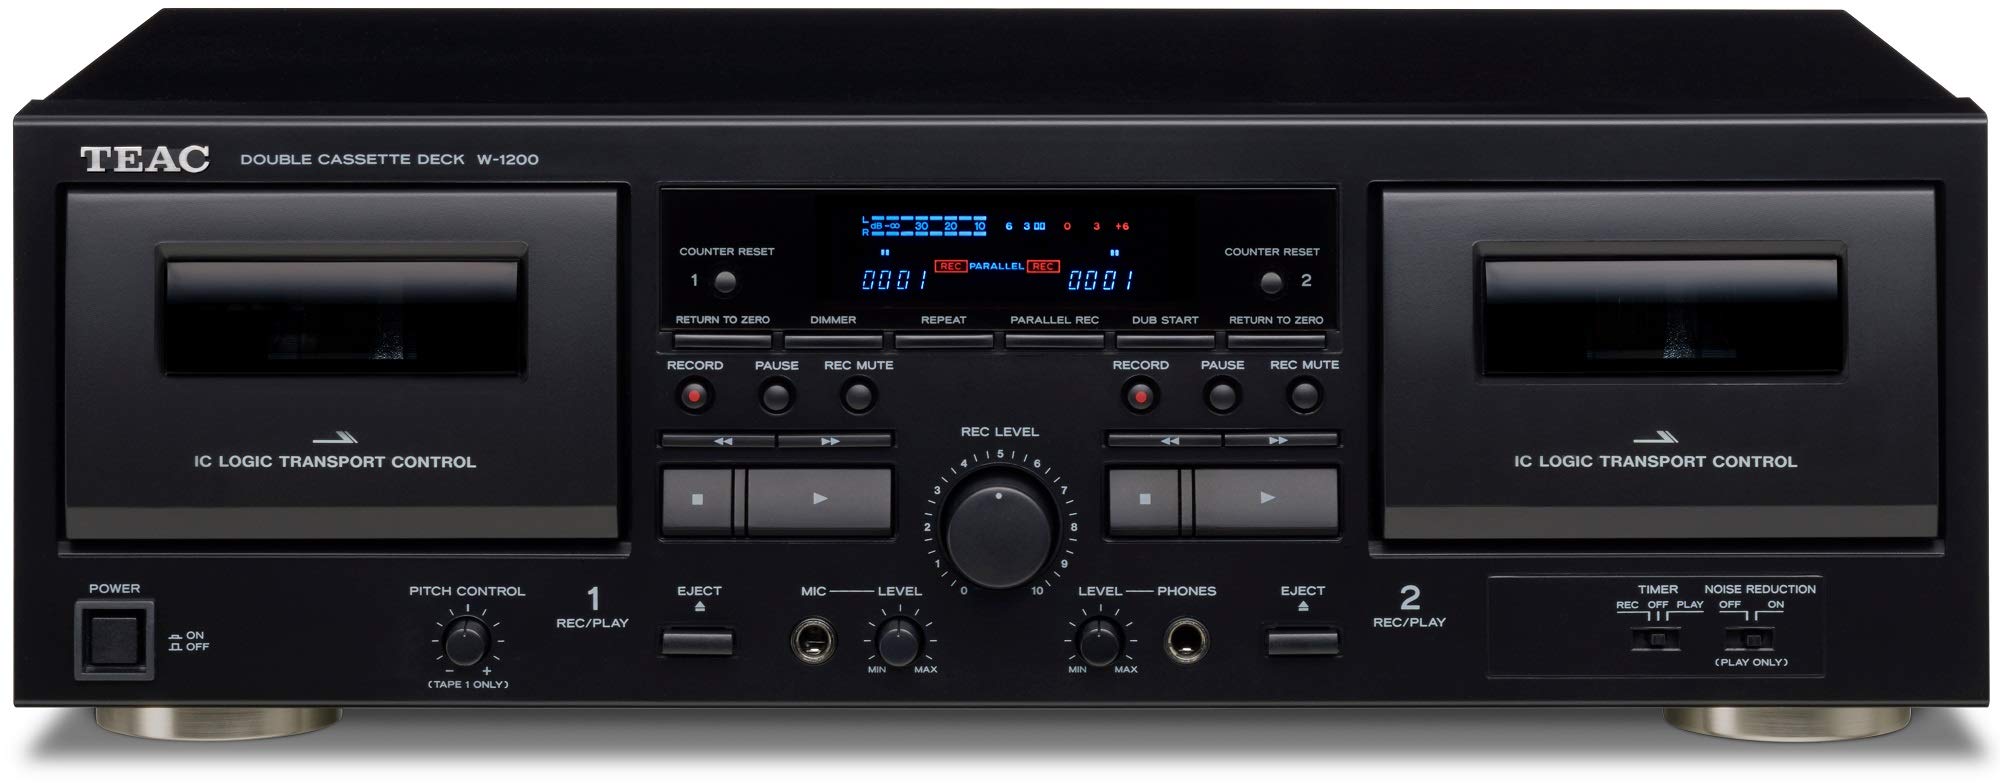 Teac W-1200 Dual Cassette Deck with Recorder/ USB/ Pitch/ Karaoke-Mic-in and Remote